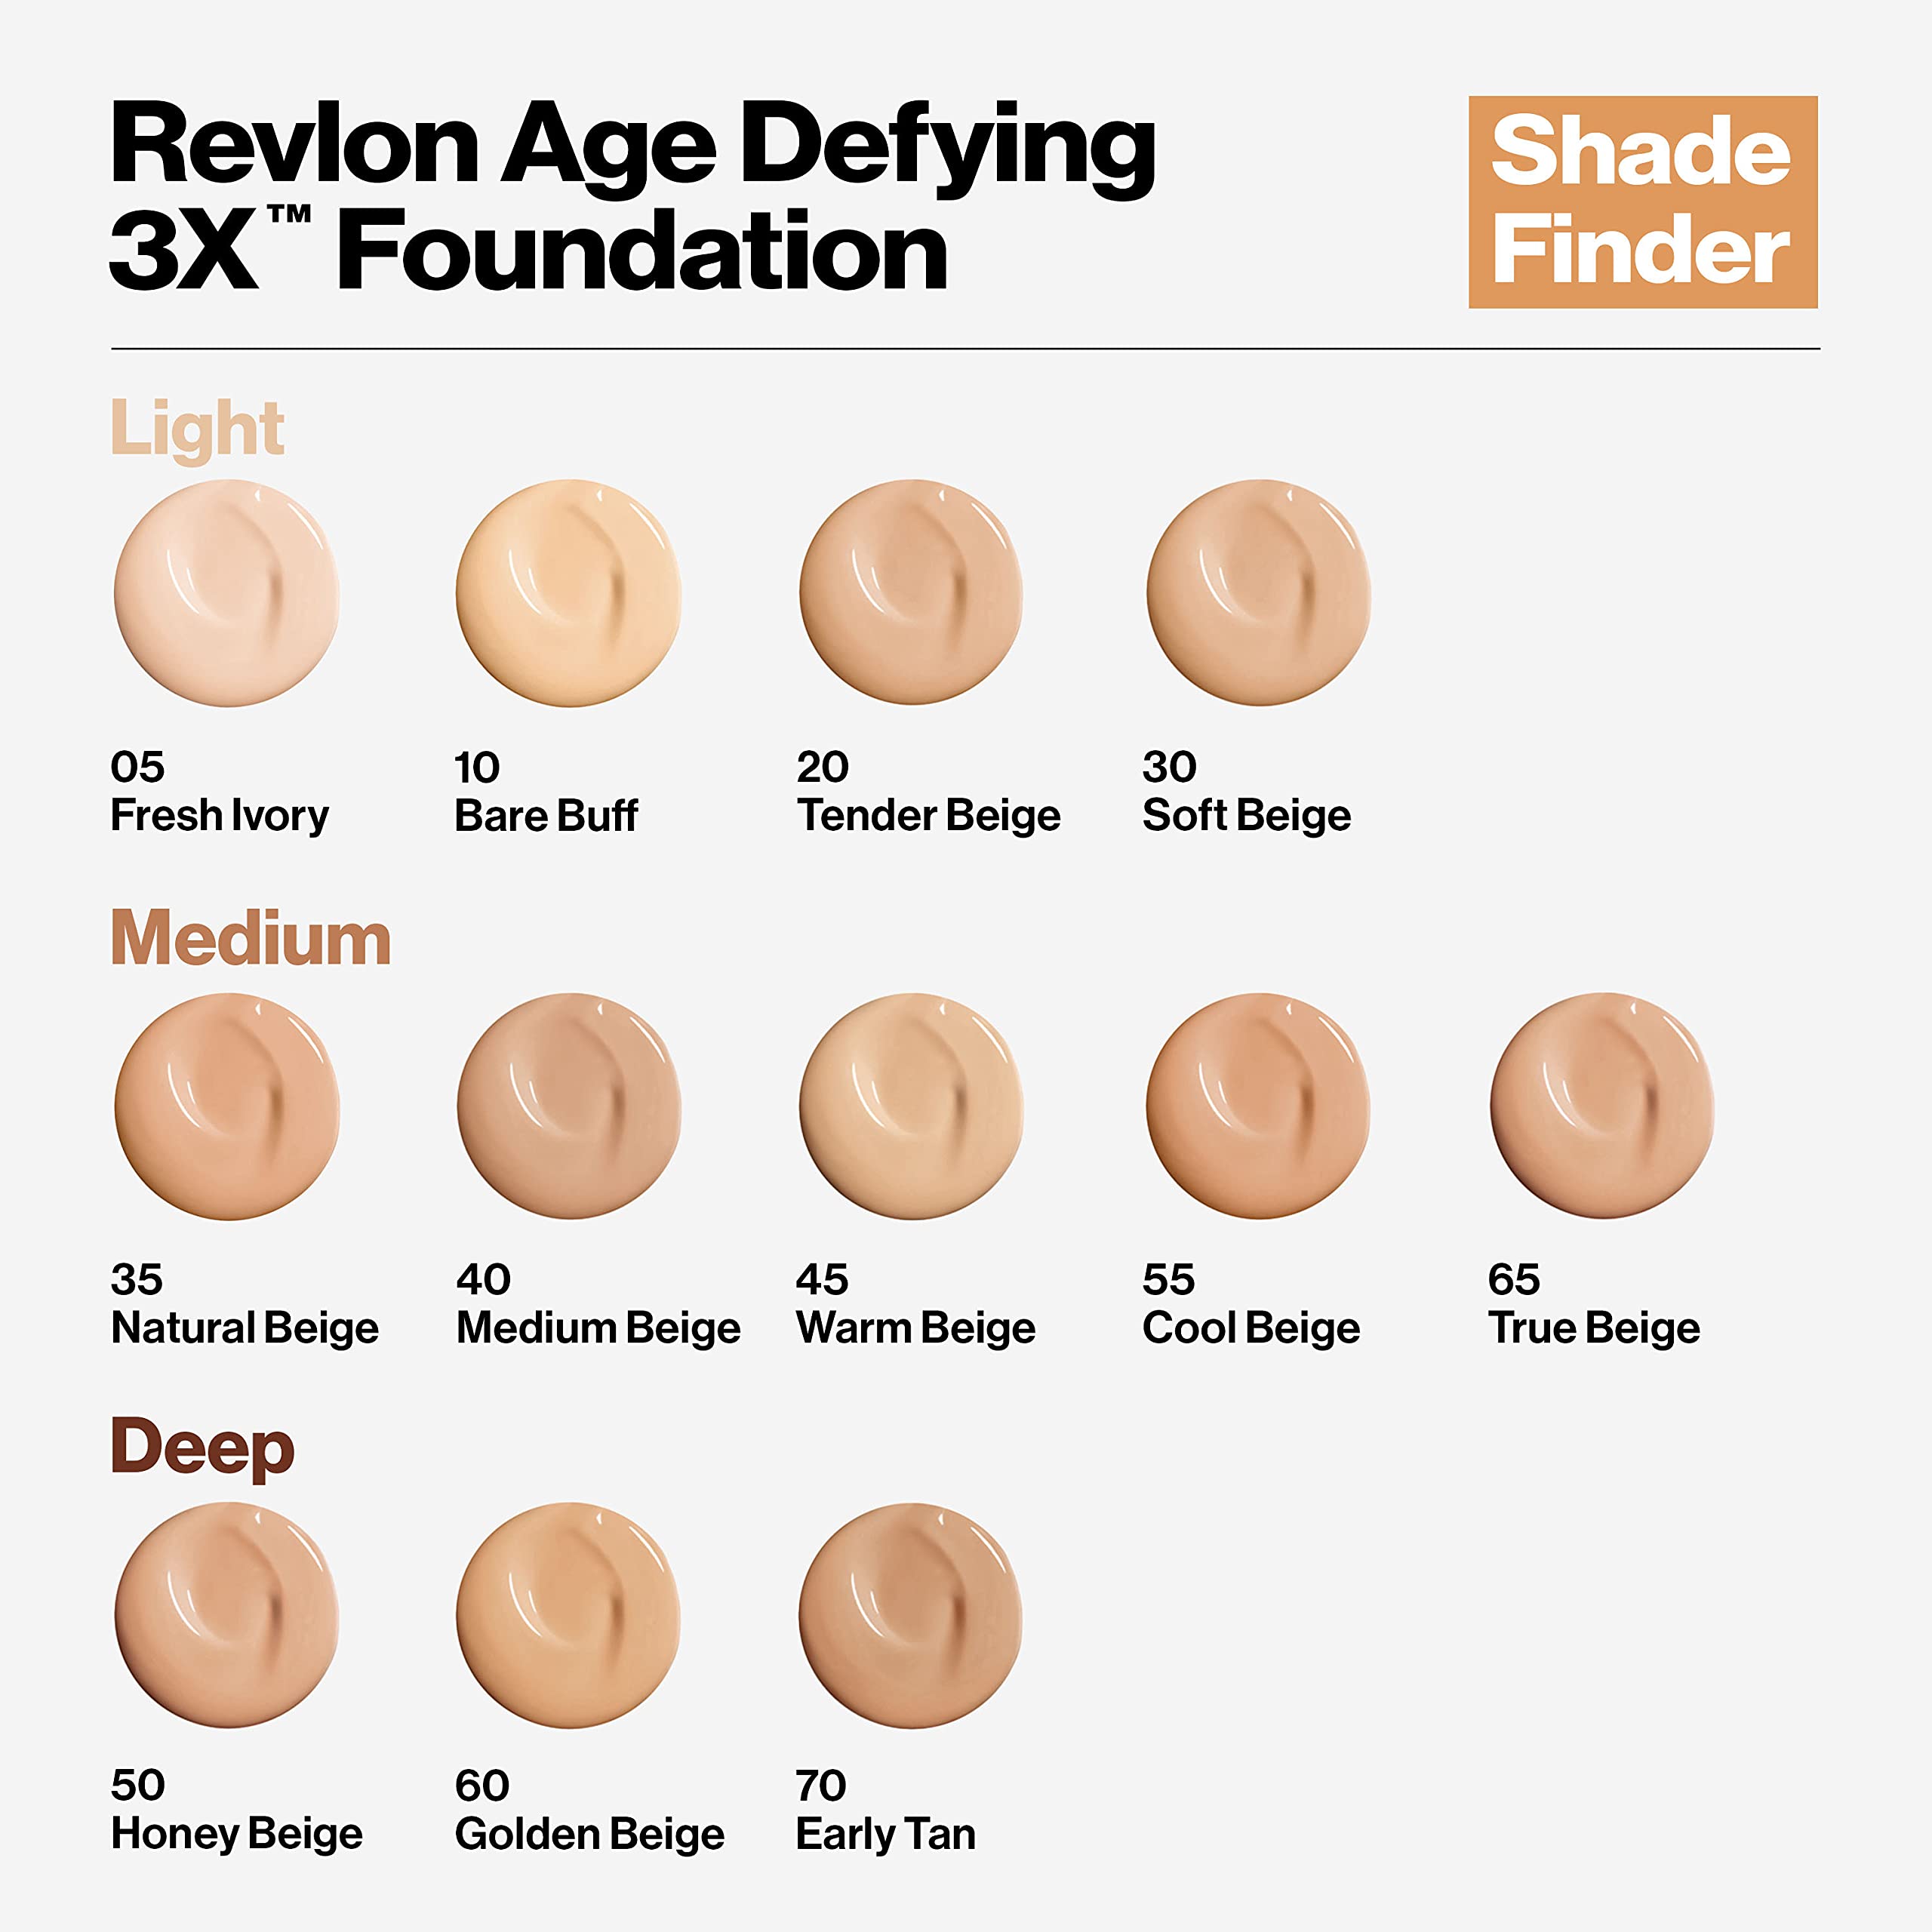 Revlon Age Defying 3X Makeup Foundation, Firming, Lifting and Anti-Aging Medium, Buildable Coverage with Natural Finish SPF 20, 020 Tender Beige, 1 fl oz